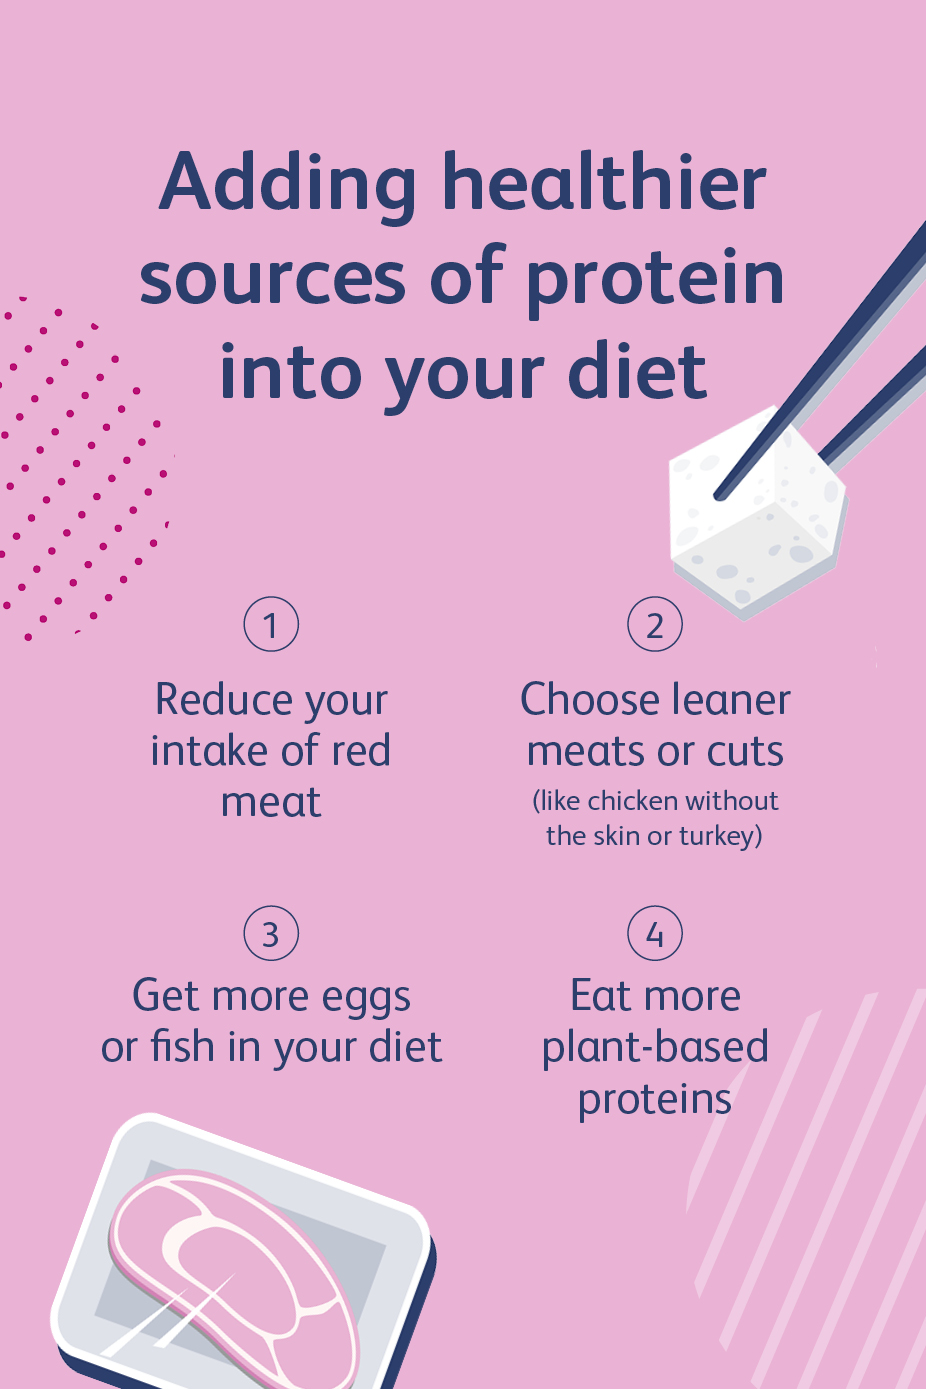 Healthy sources of protein